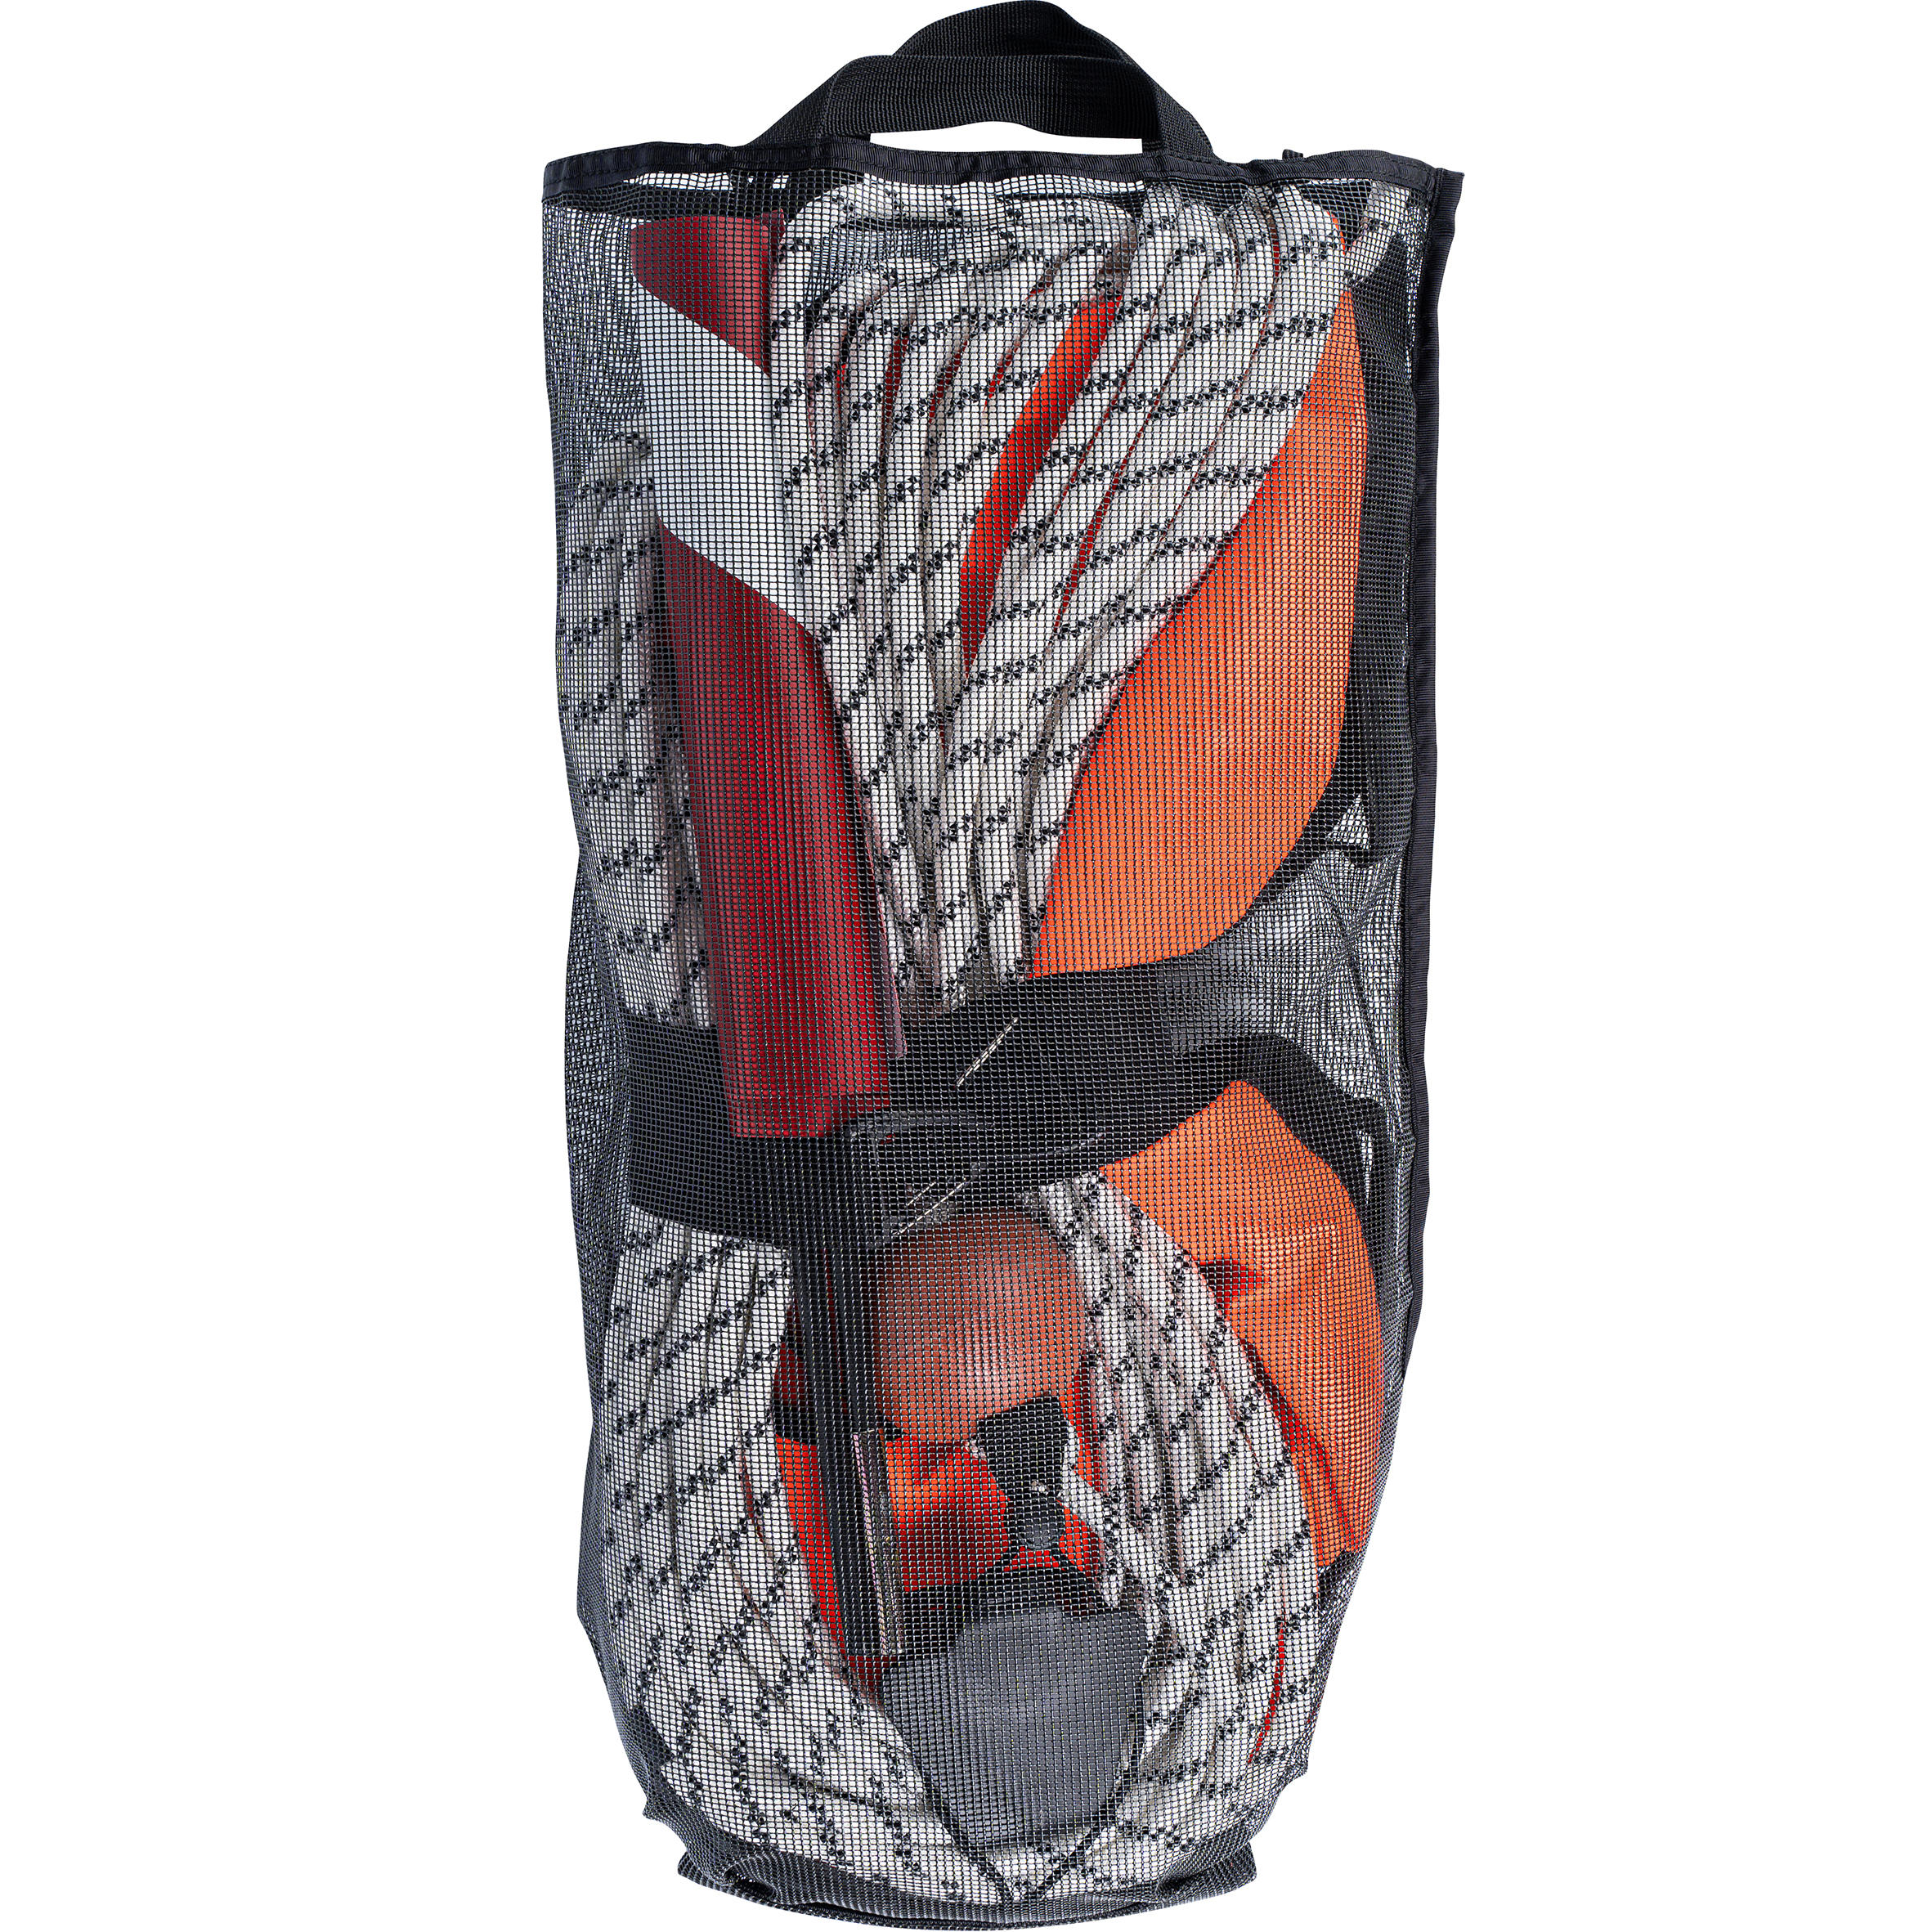 Freediving buoy FRD 500 Deep 20 for training space of up to 20m (line included). 10/10